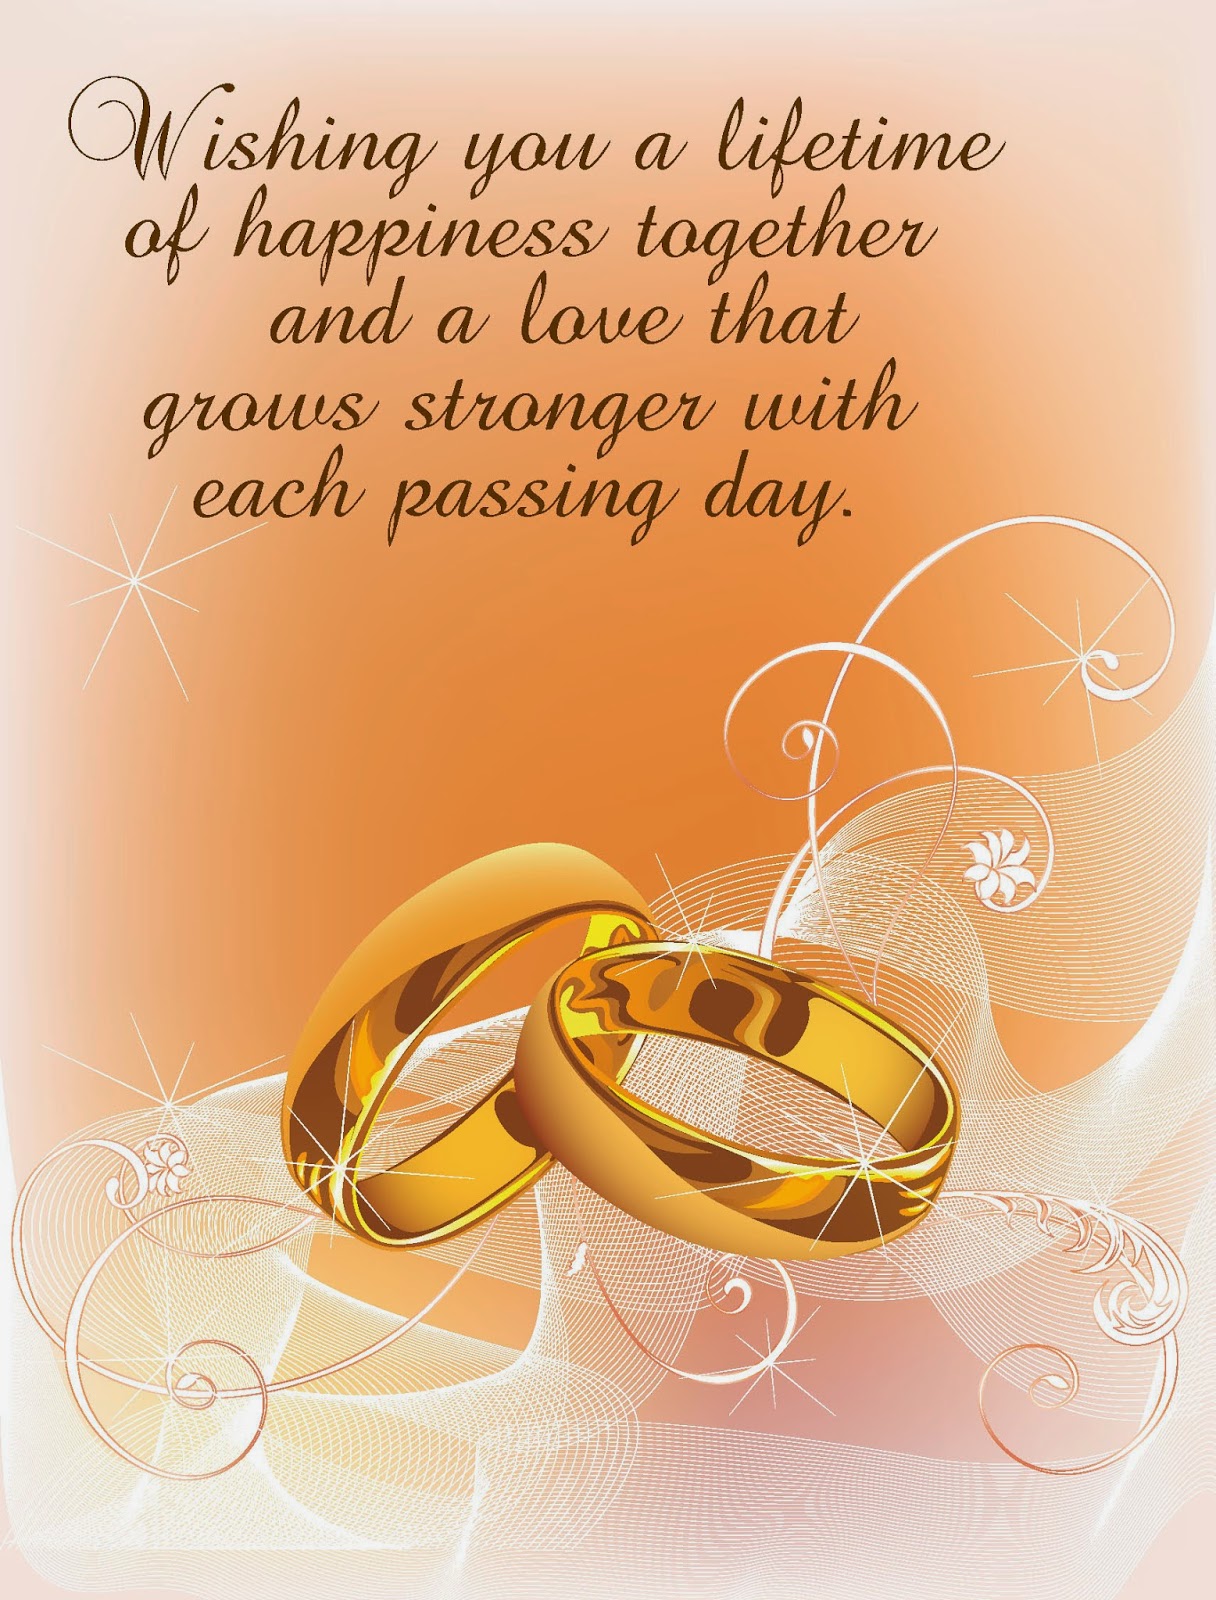 Christian Marriage Wishes Quotes Quotesgram